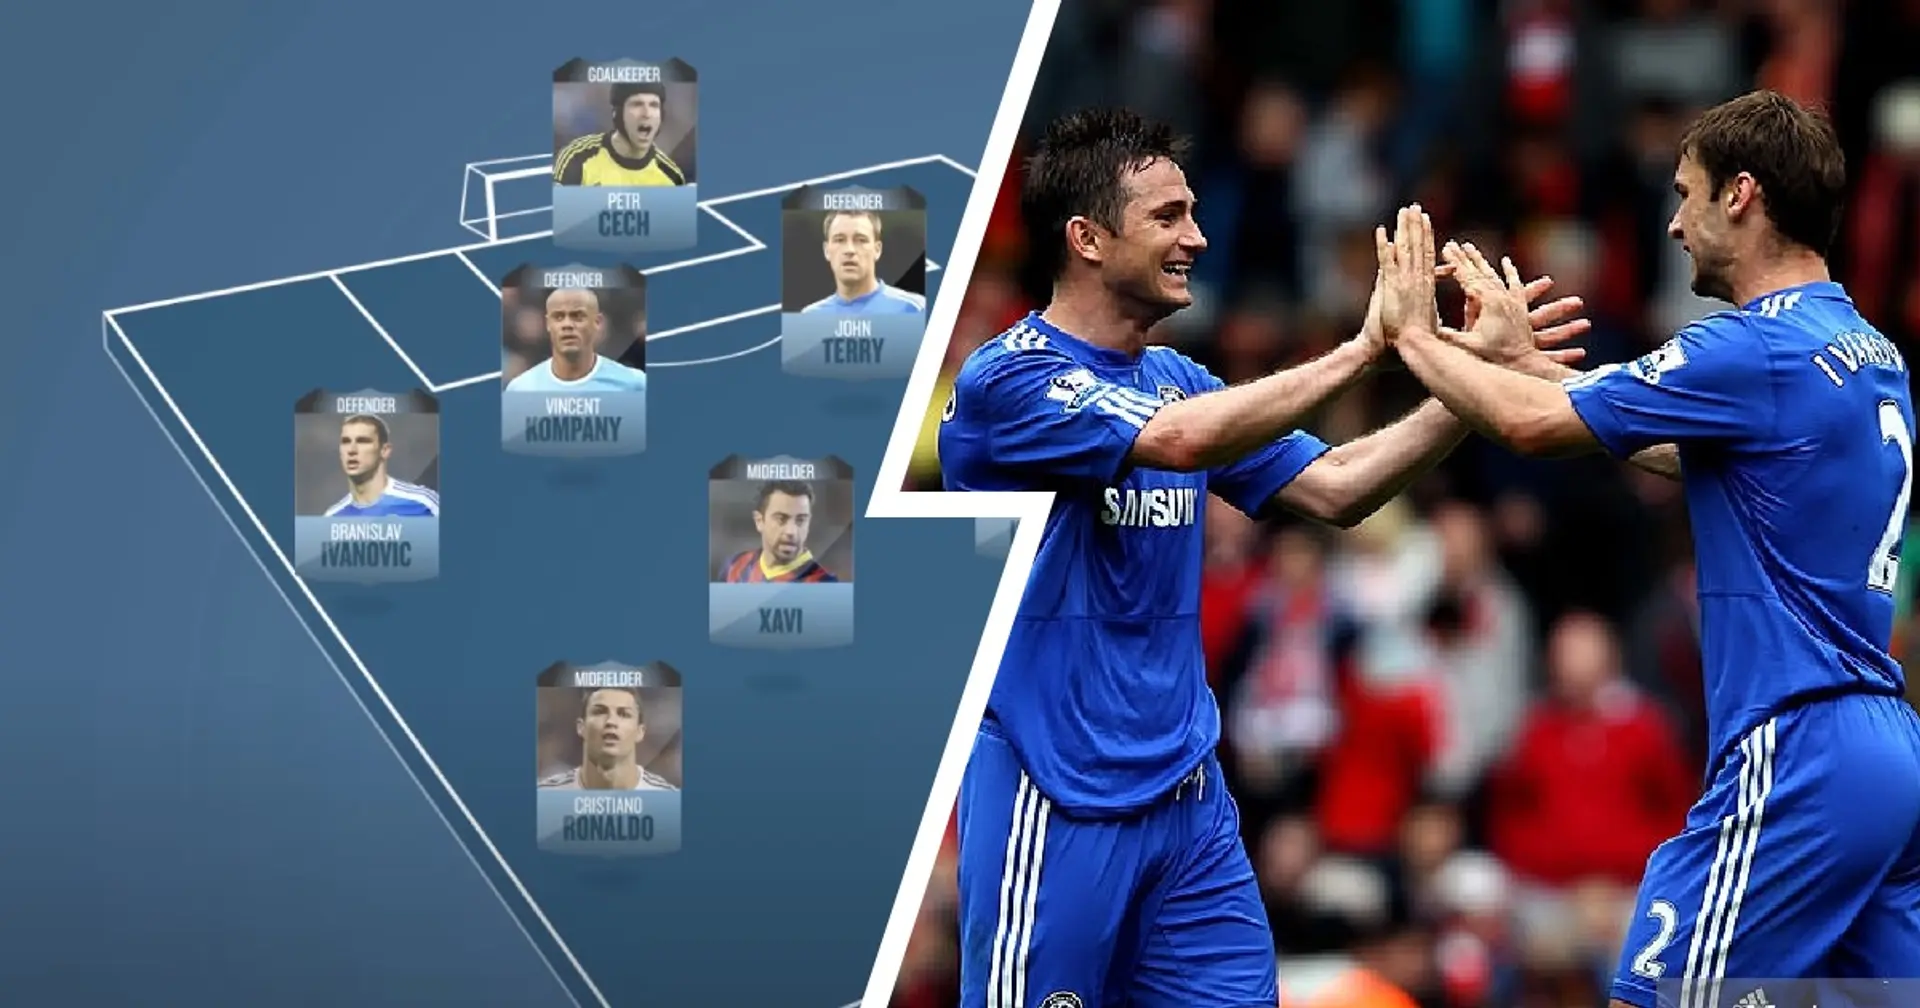 Frank Lampard's Best XI has 5 Chelsea players and just 1 from Man City